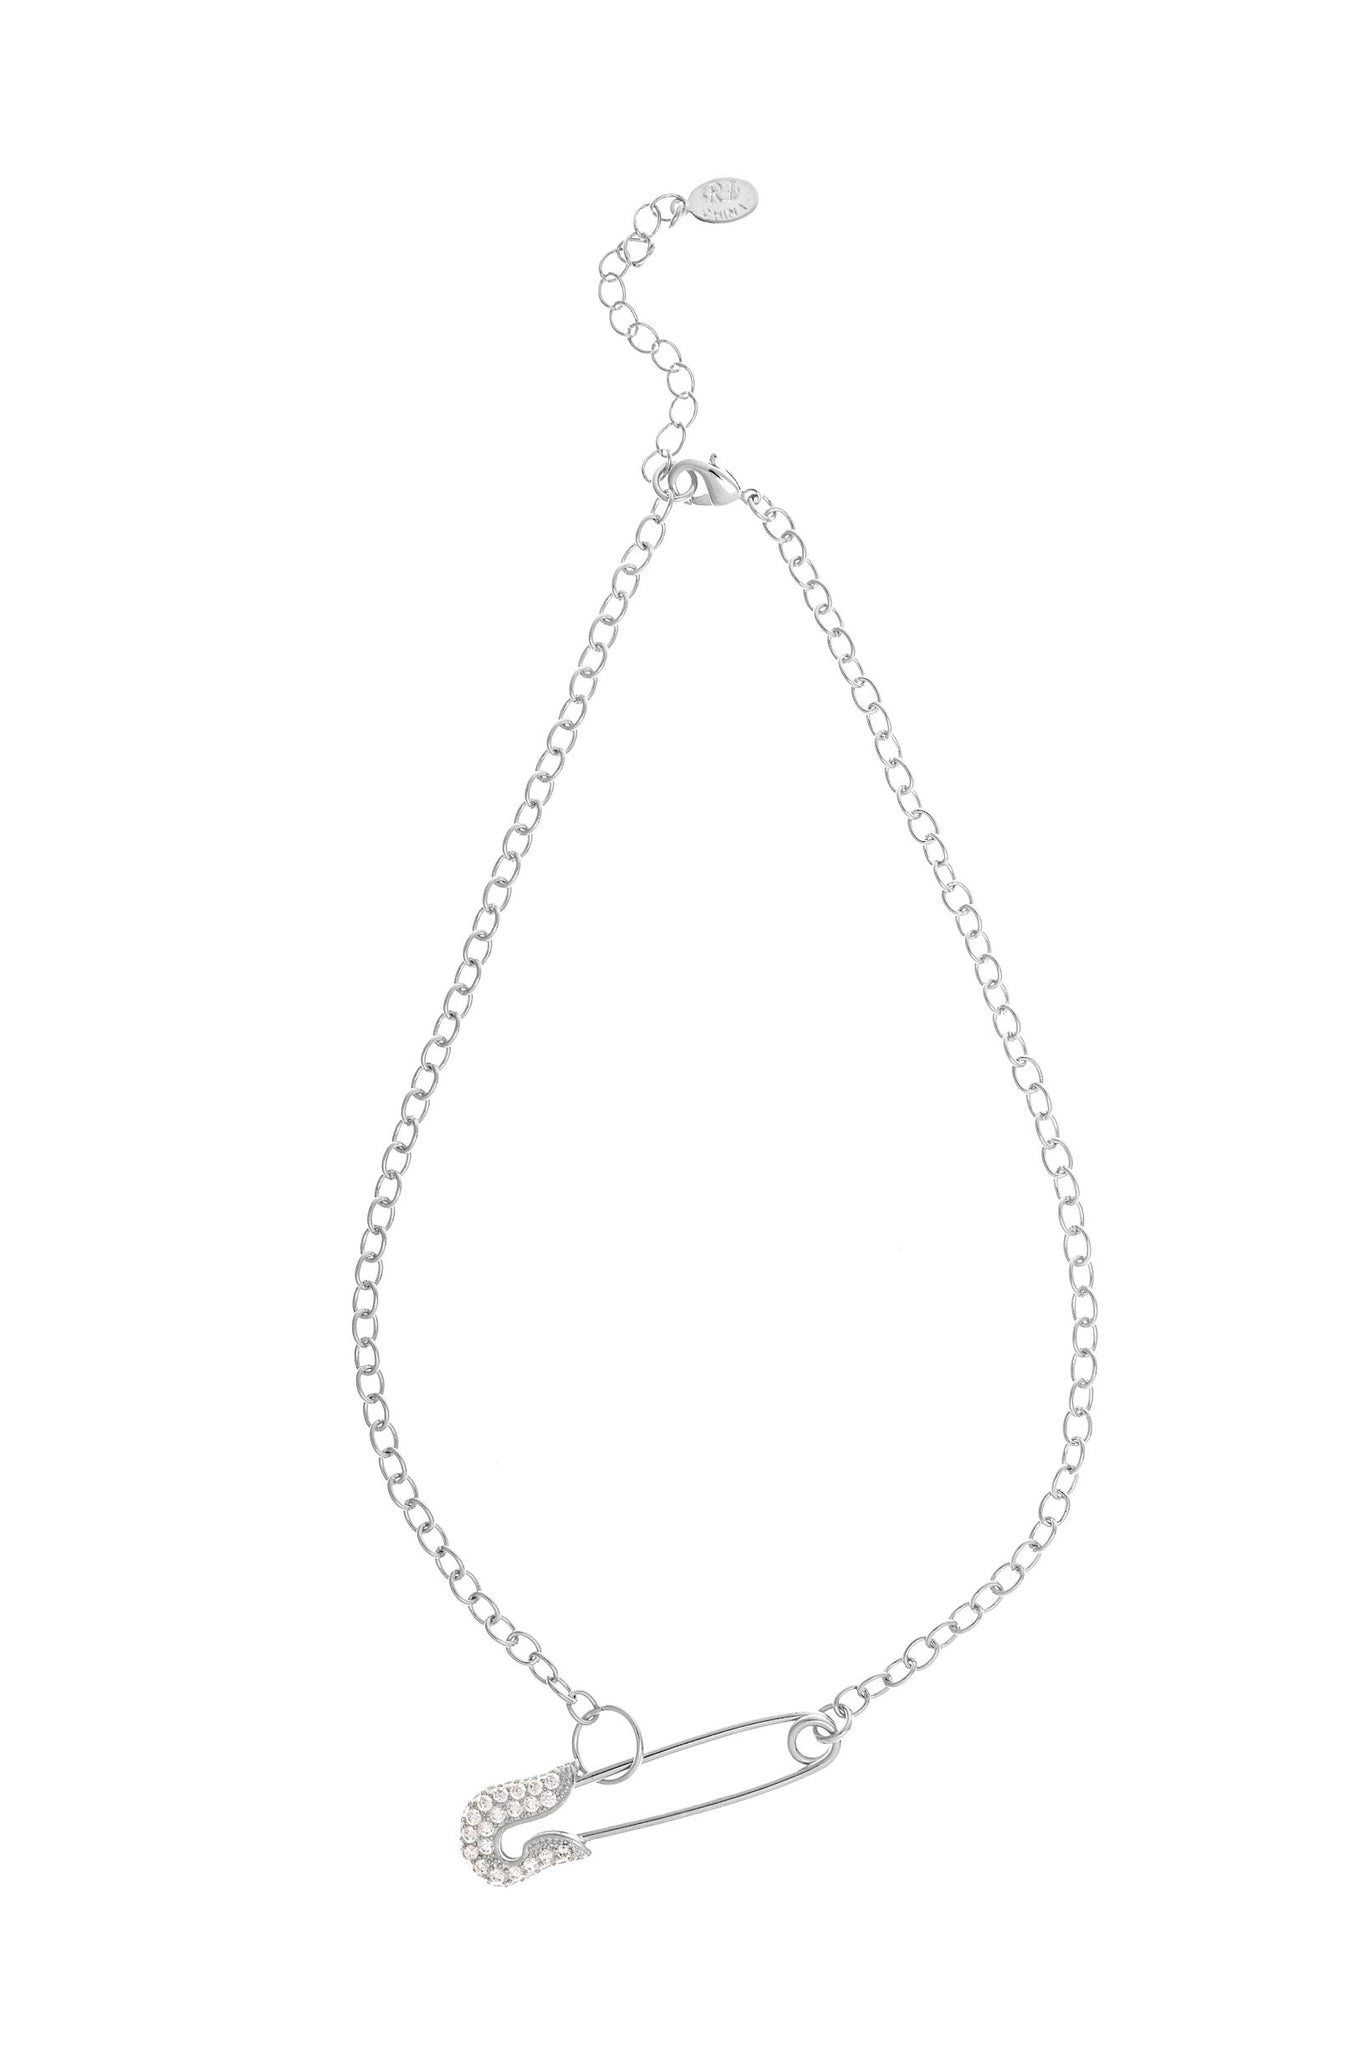 Rhodium Safety Pin Chain Necklace